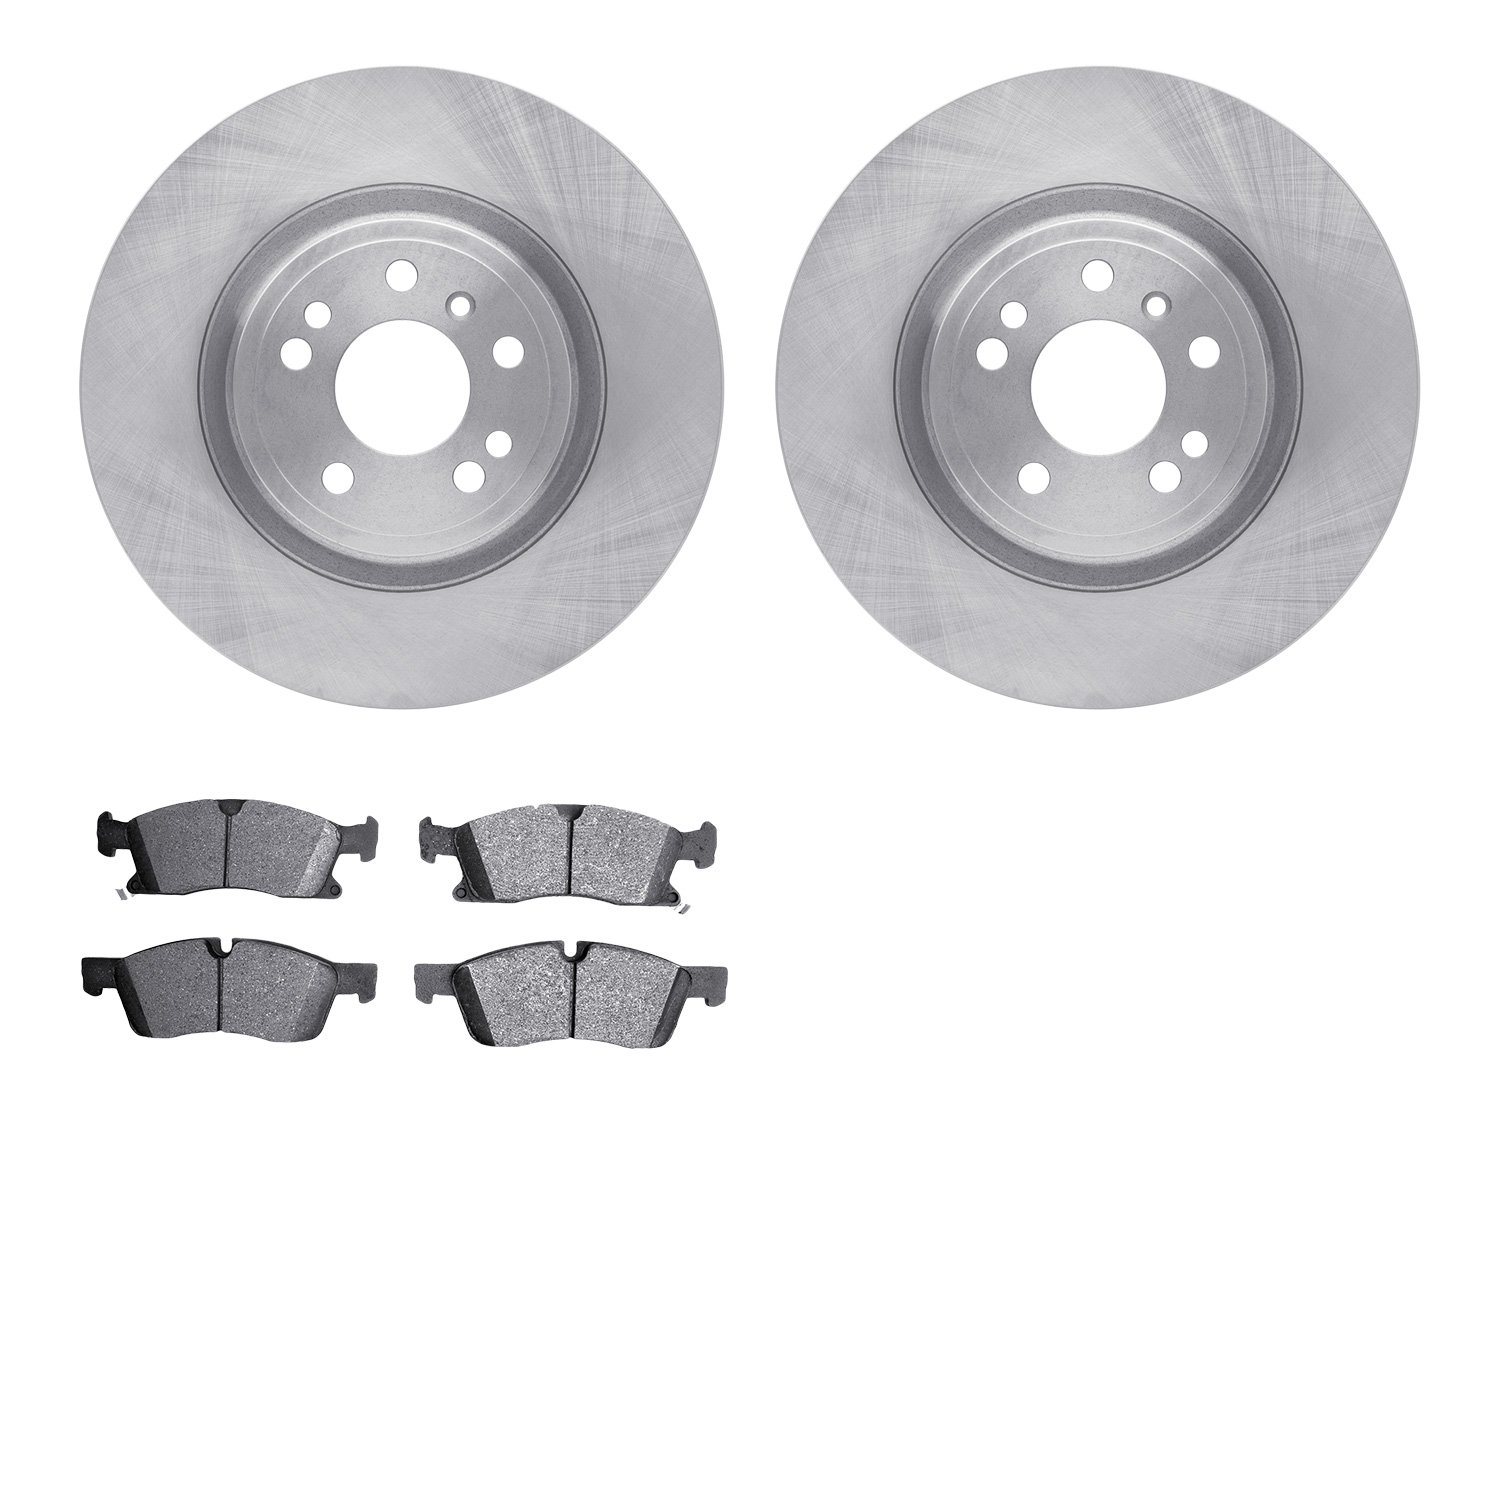 6402-63001 Brake Rotors with Ultimate-Duty Brake Pads, 2012-2018 Mercedes-Benz, Position: Front